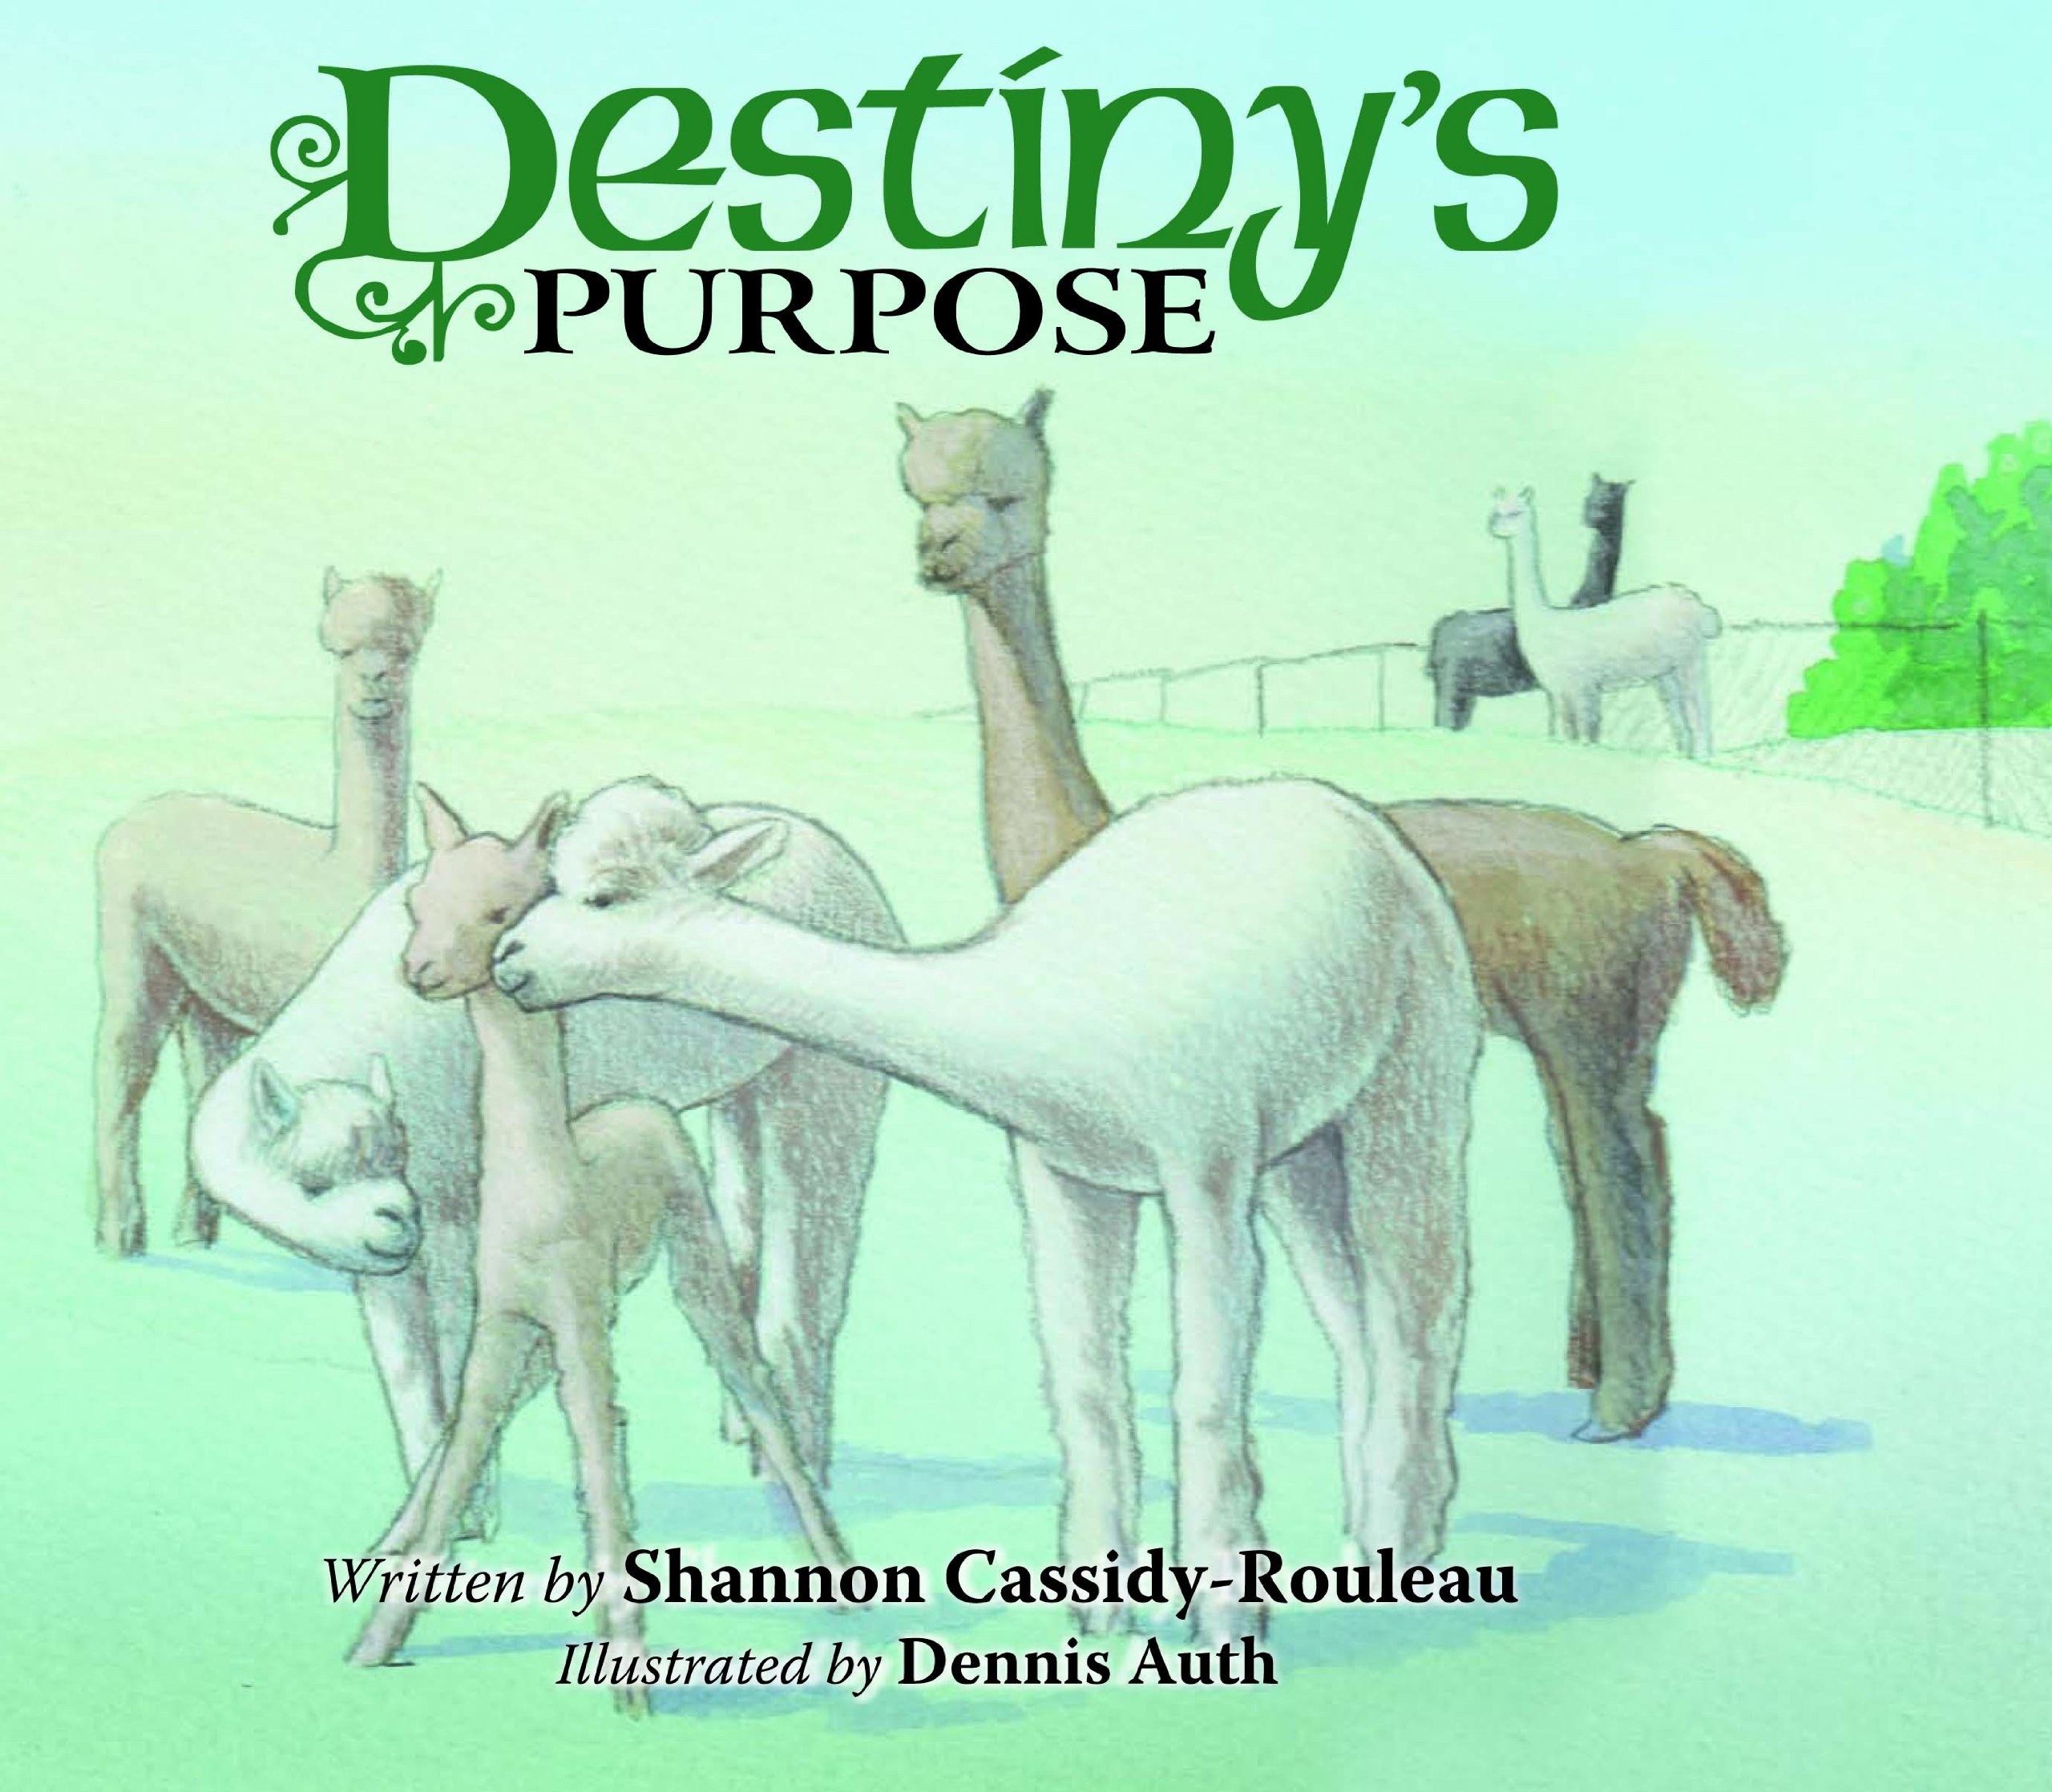 Destiny’s Purpose by Shannon Cassidy-Rouleau